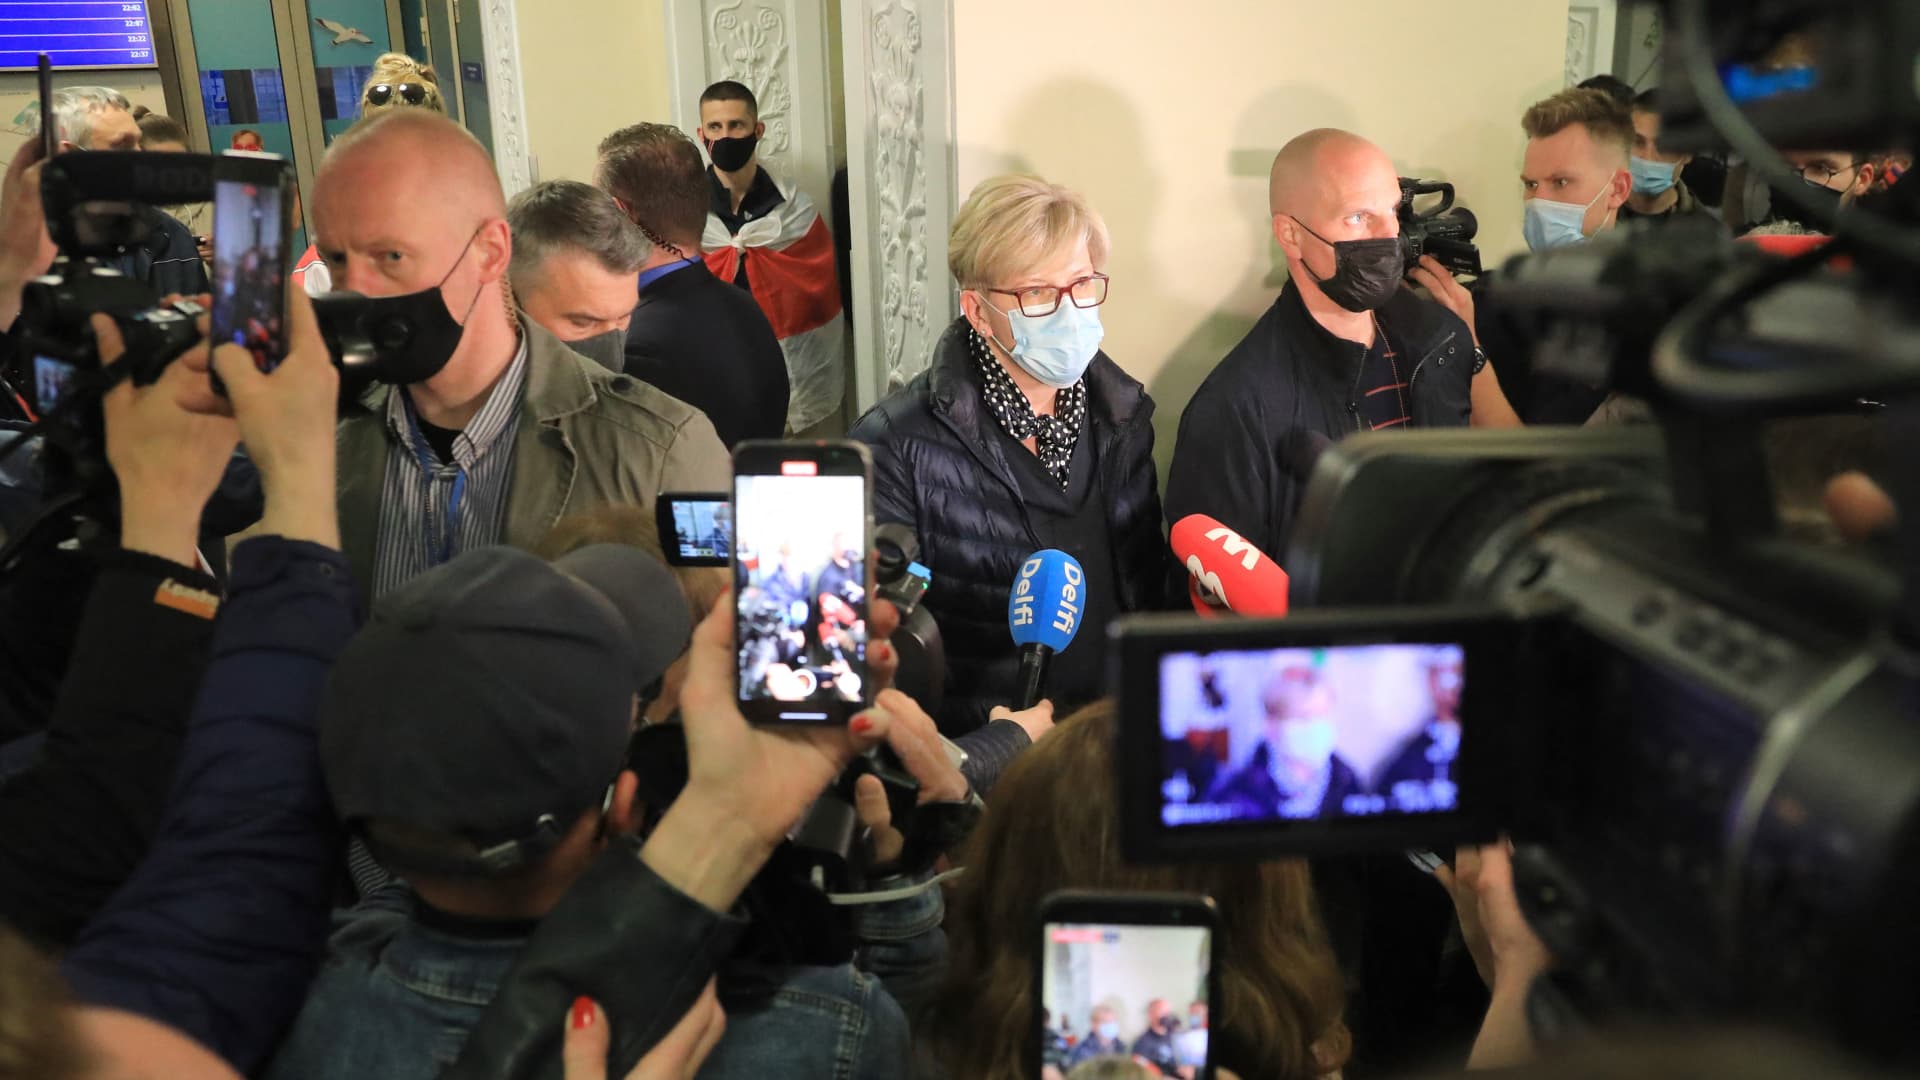 Lithuanian Prime Minister Ingrida Simonyte (C) speaks to journalists at Vilnius International Airport on May 23, 2021, following the landing of the Ryanair passenger plane.